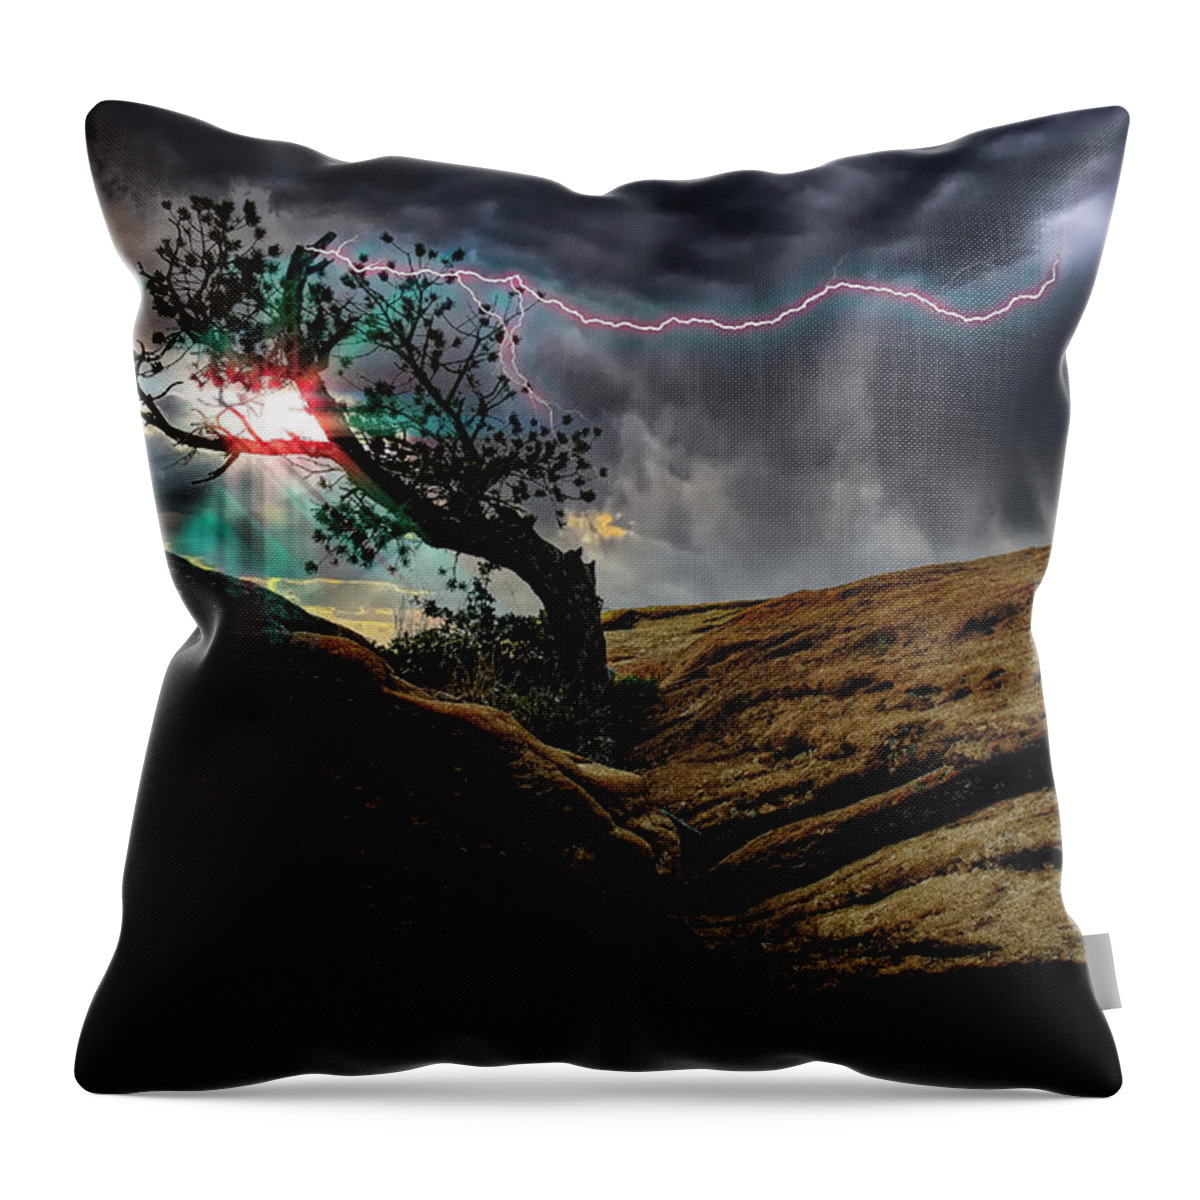 Tree Throw Pillow featuring the photograph Struck by Lightning by Harry Spitz